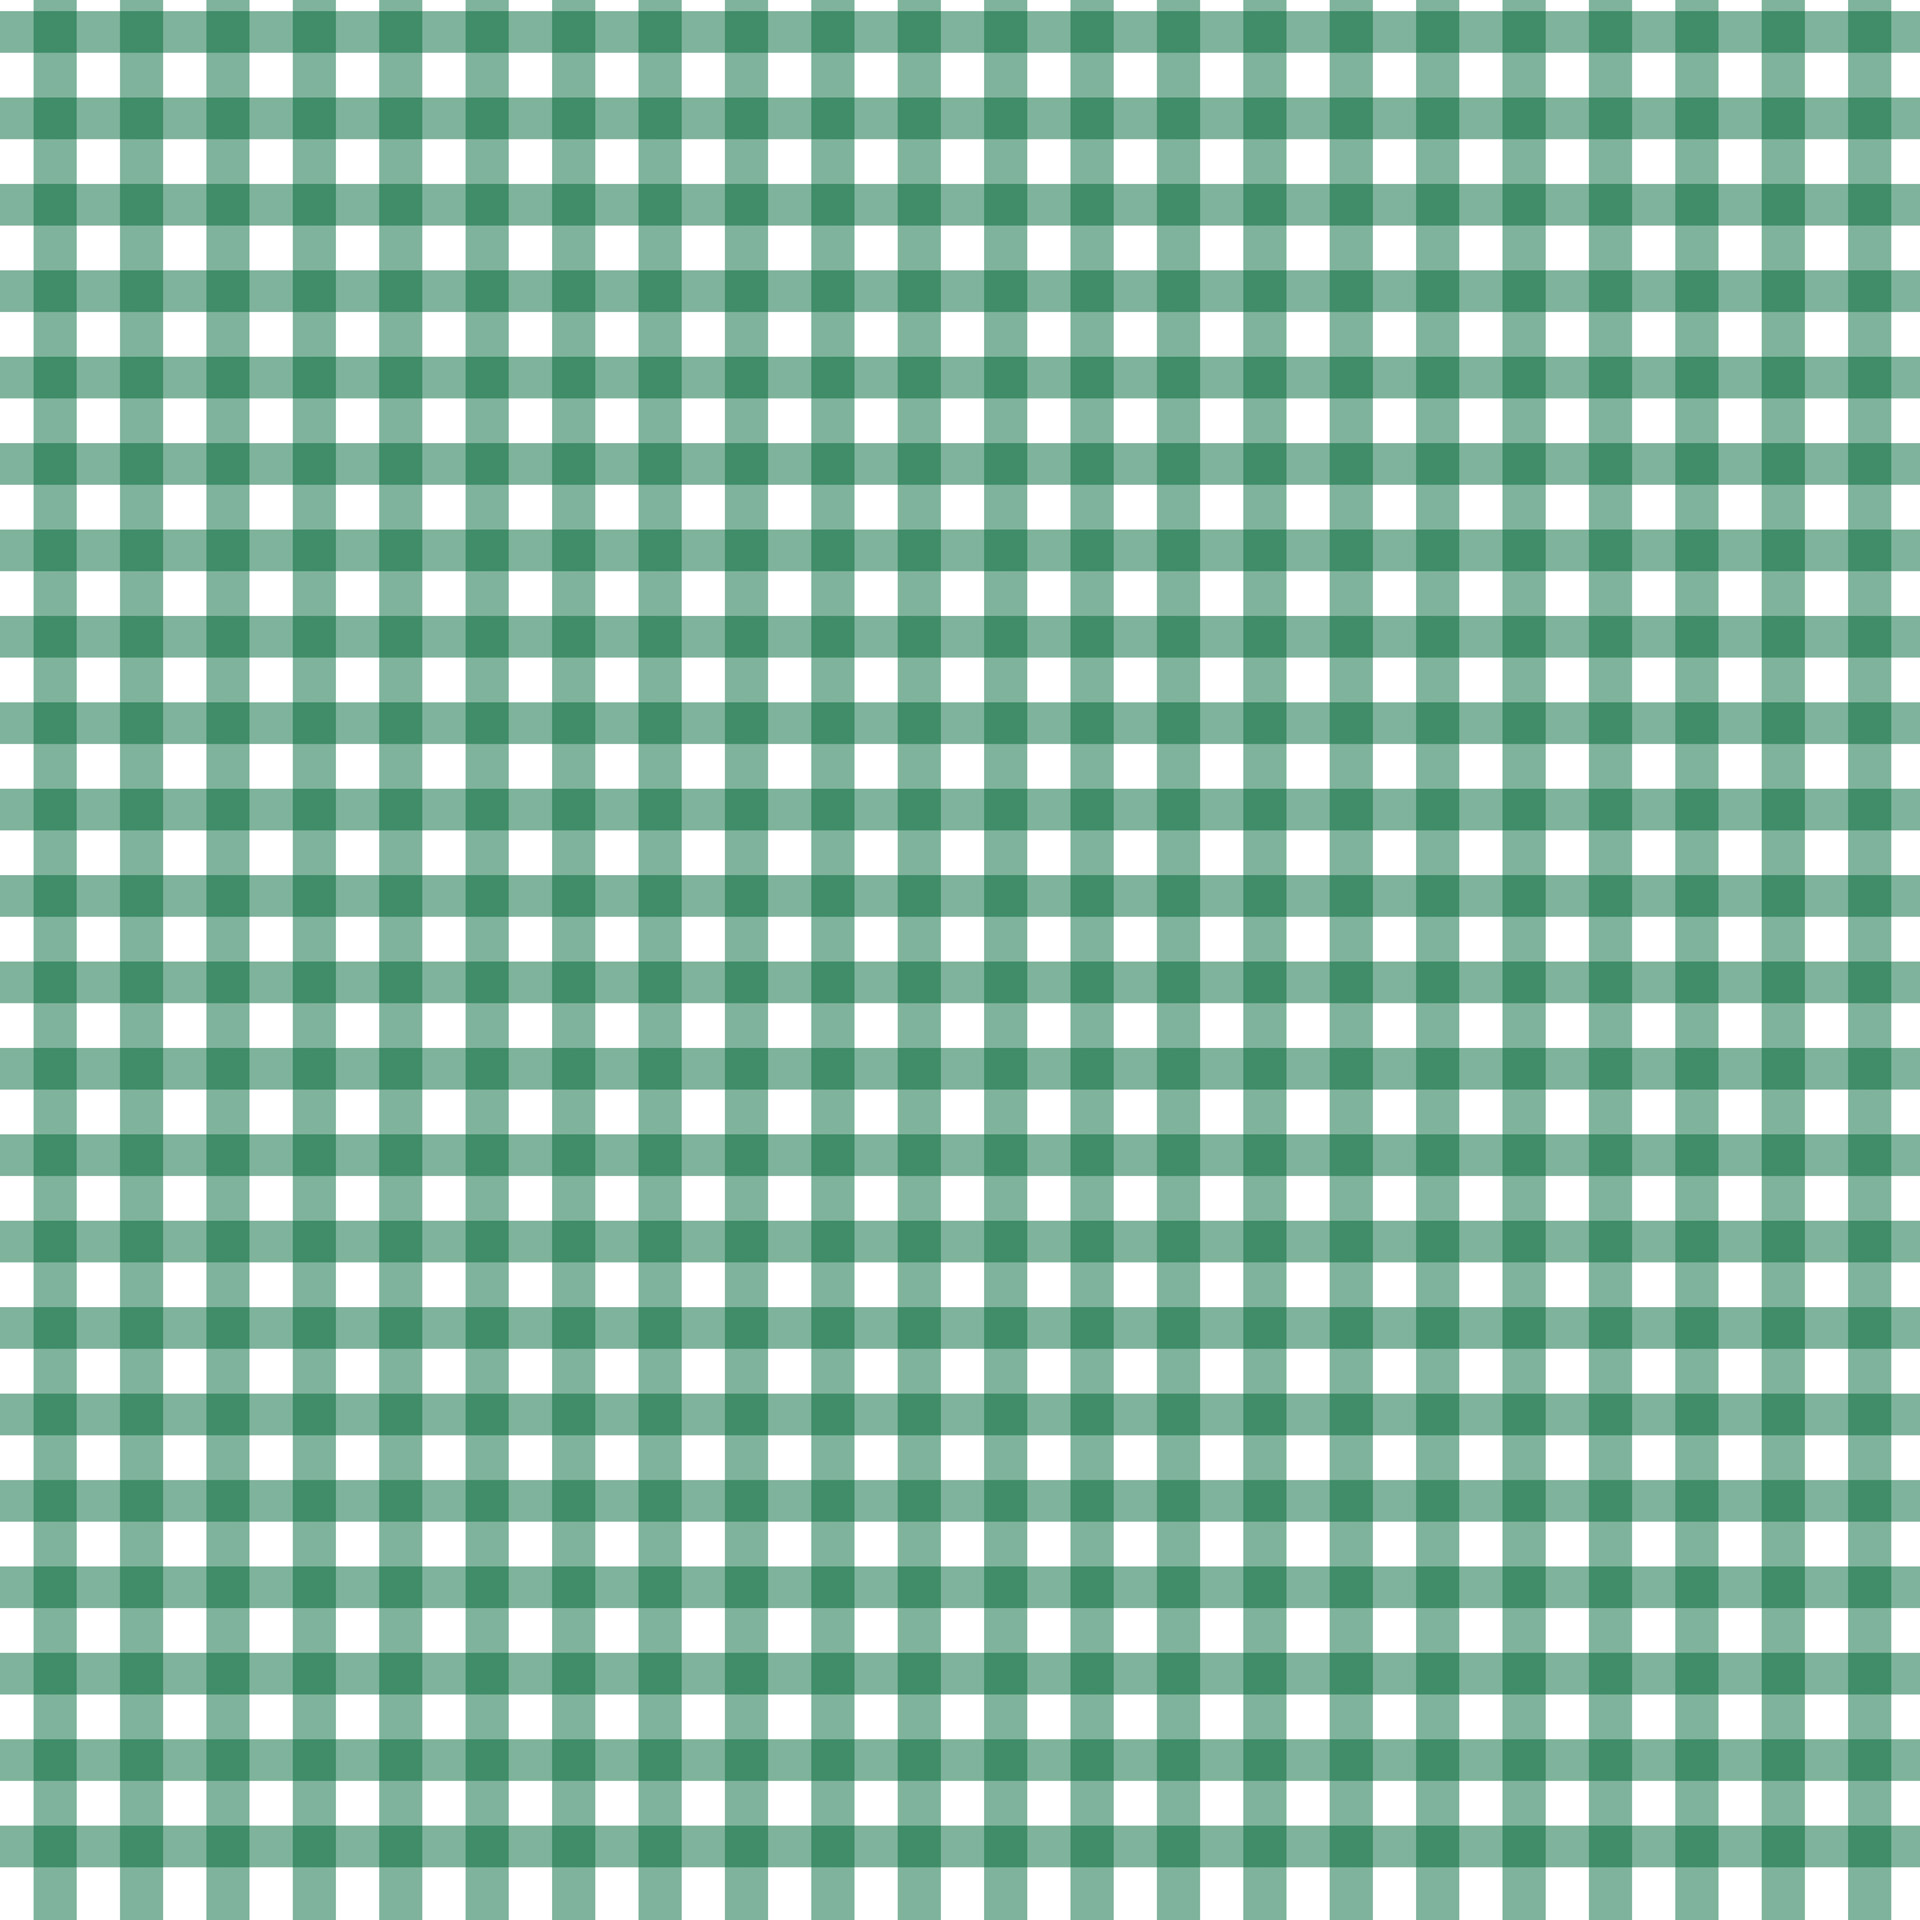 green and white gingham checks pattern background seamless